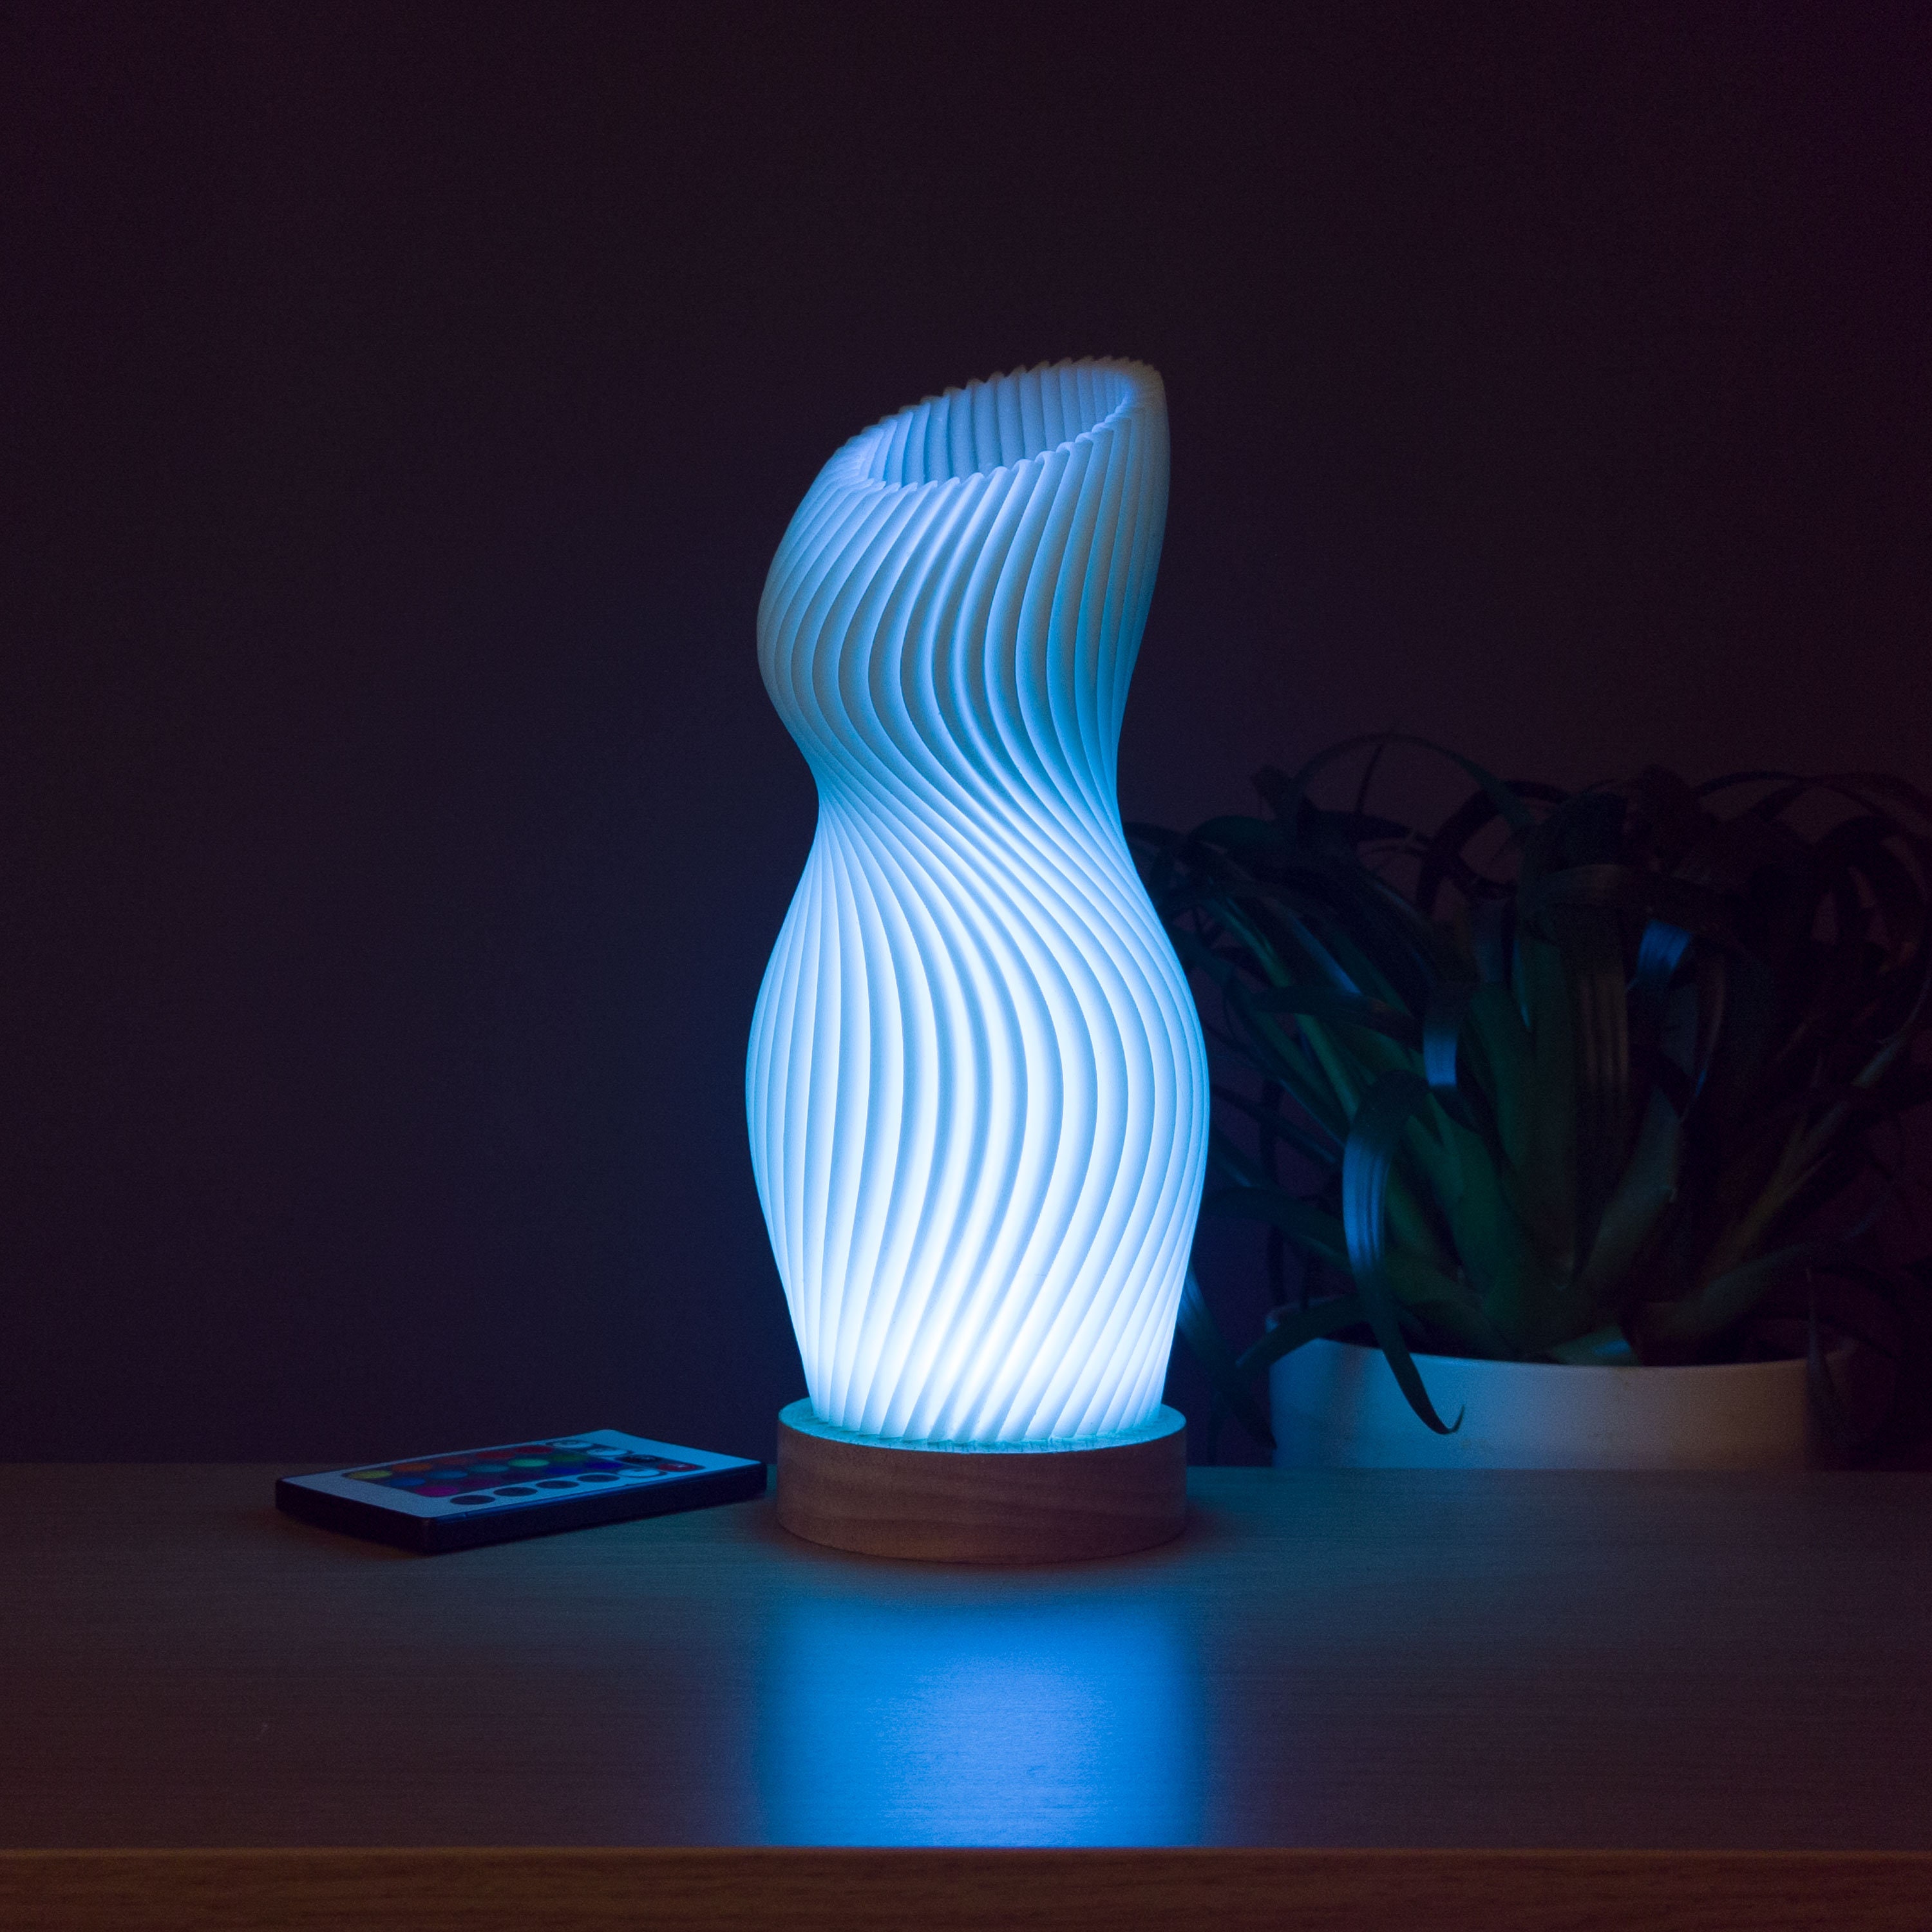 Waves Table Lamp, Minimalist Lamp, Multicolored, 3D Printed, Home Decor,  Office/home Lighting, Decorative Light With Remote and USB Cable 